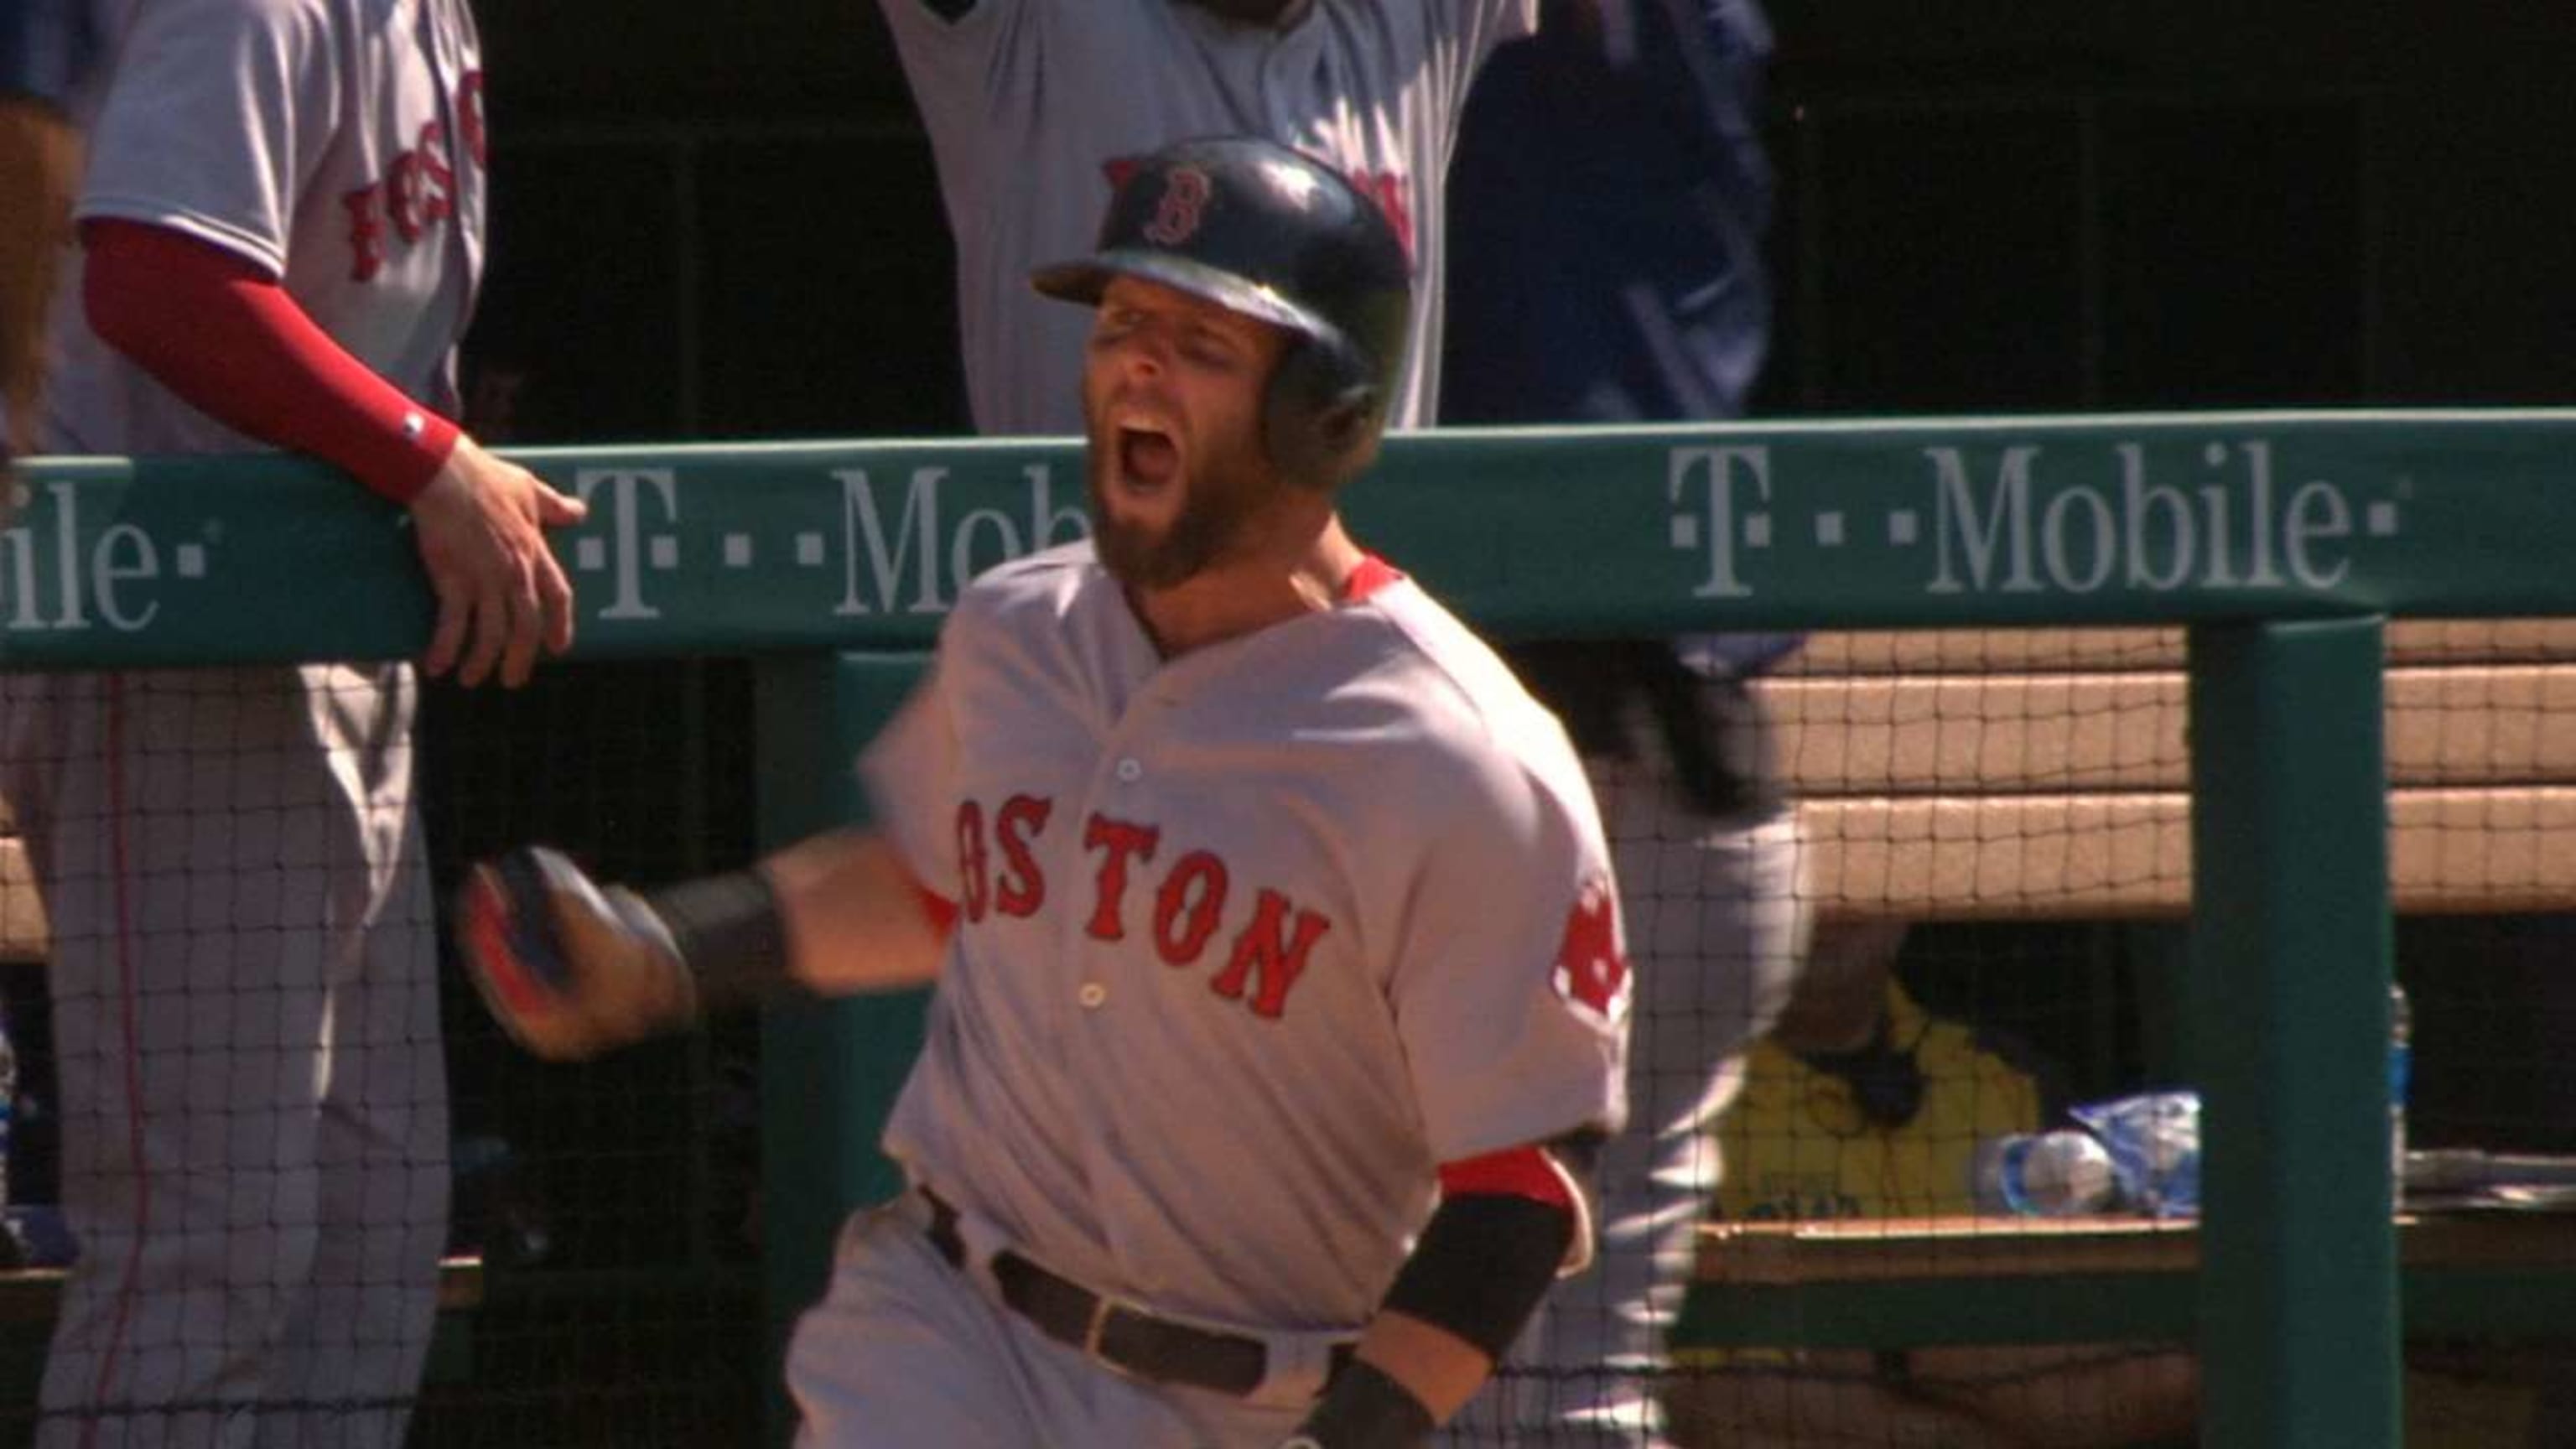 Dustin Pedroia's Unforgettable Career With Boston Comes to an End